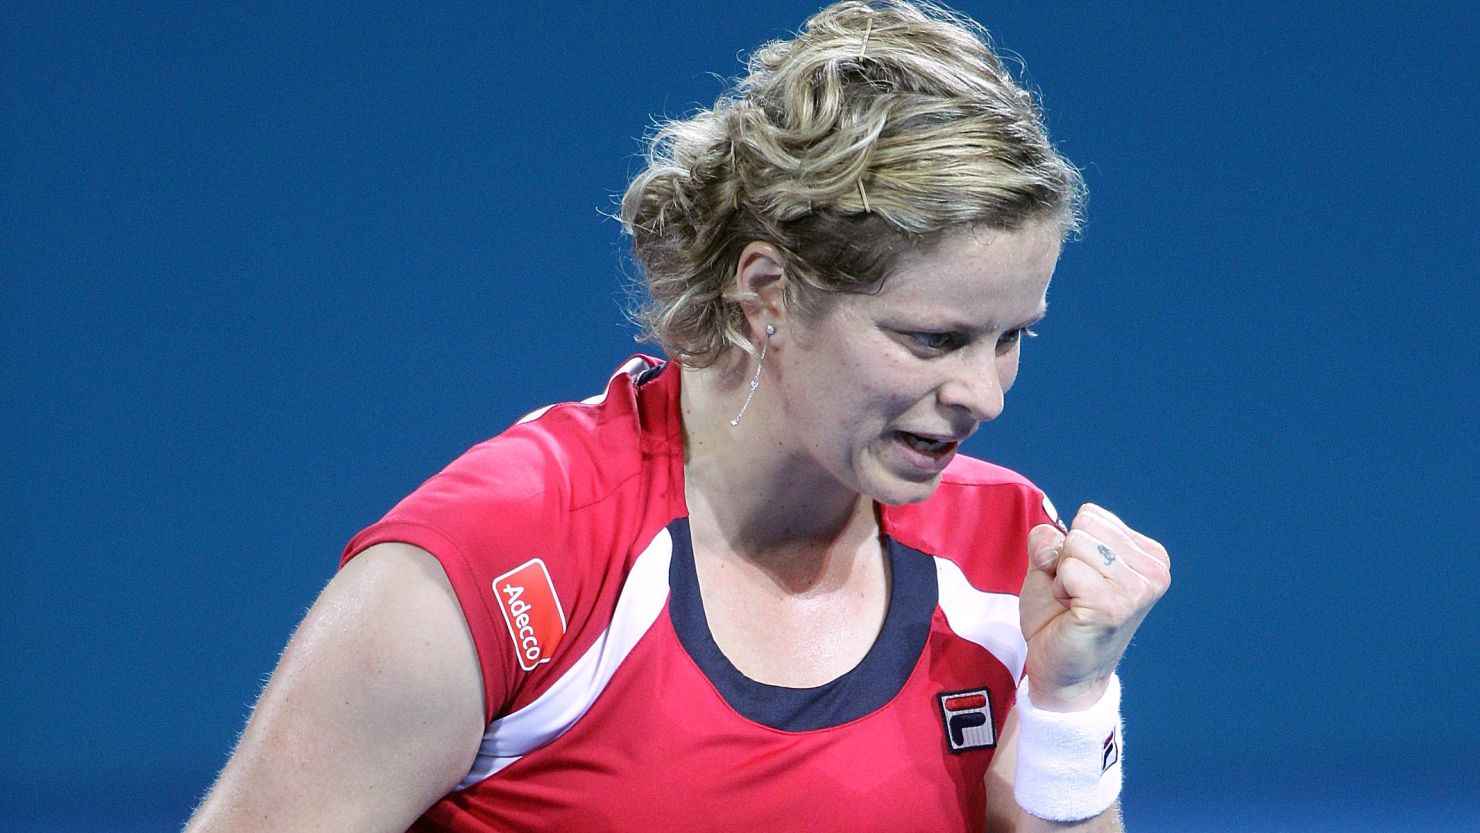 Belgium's Kim Clijsters recorded her fifth career victory over Serbia's Ana Ivanovic in Brisbane on Tuesday.